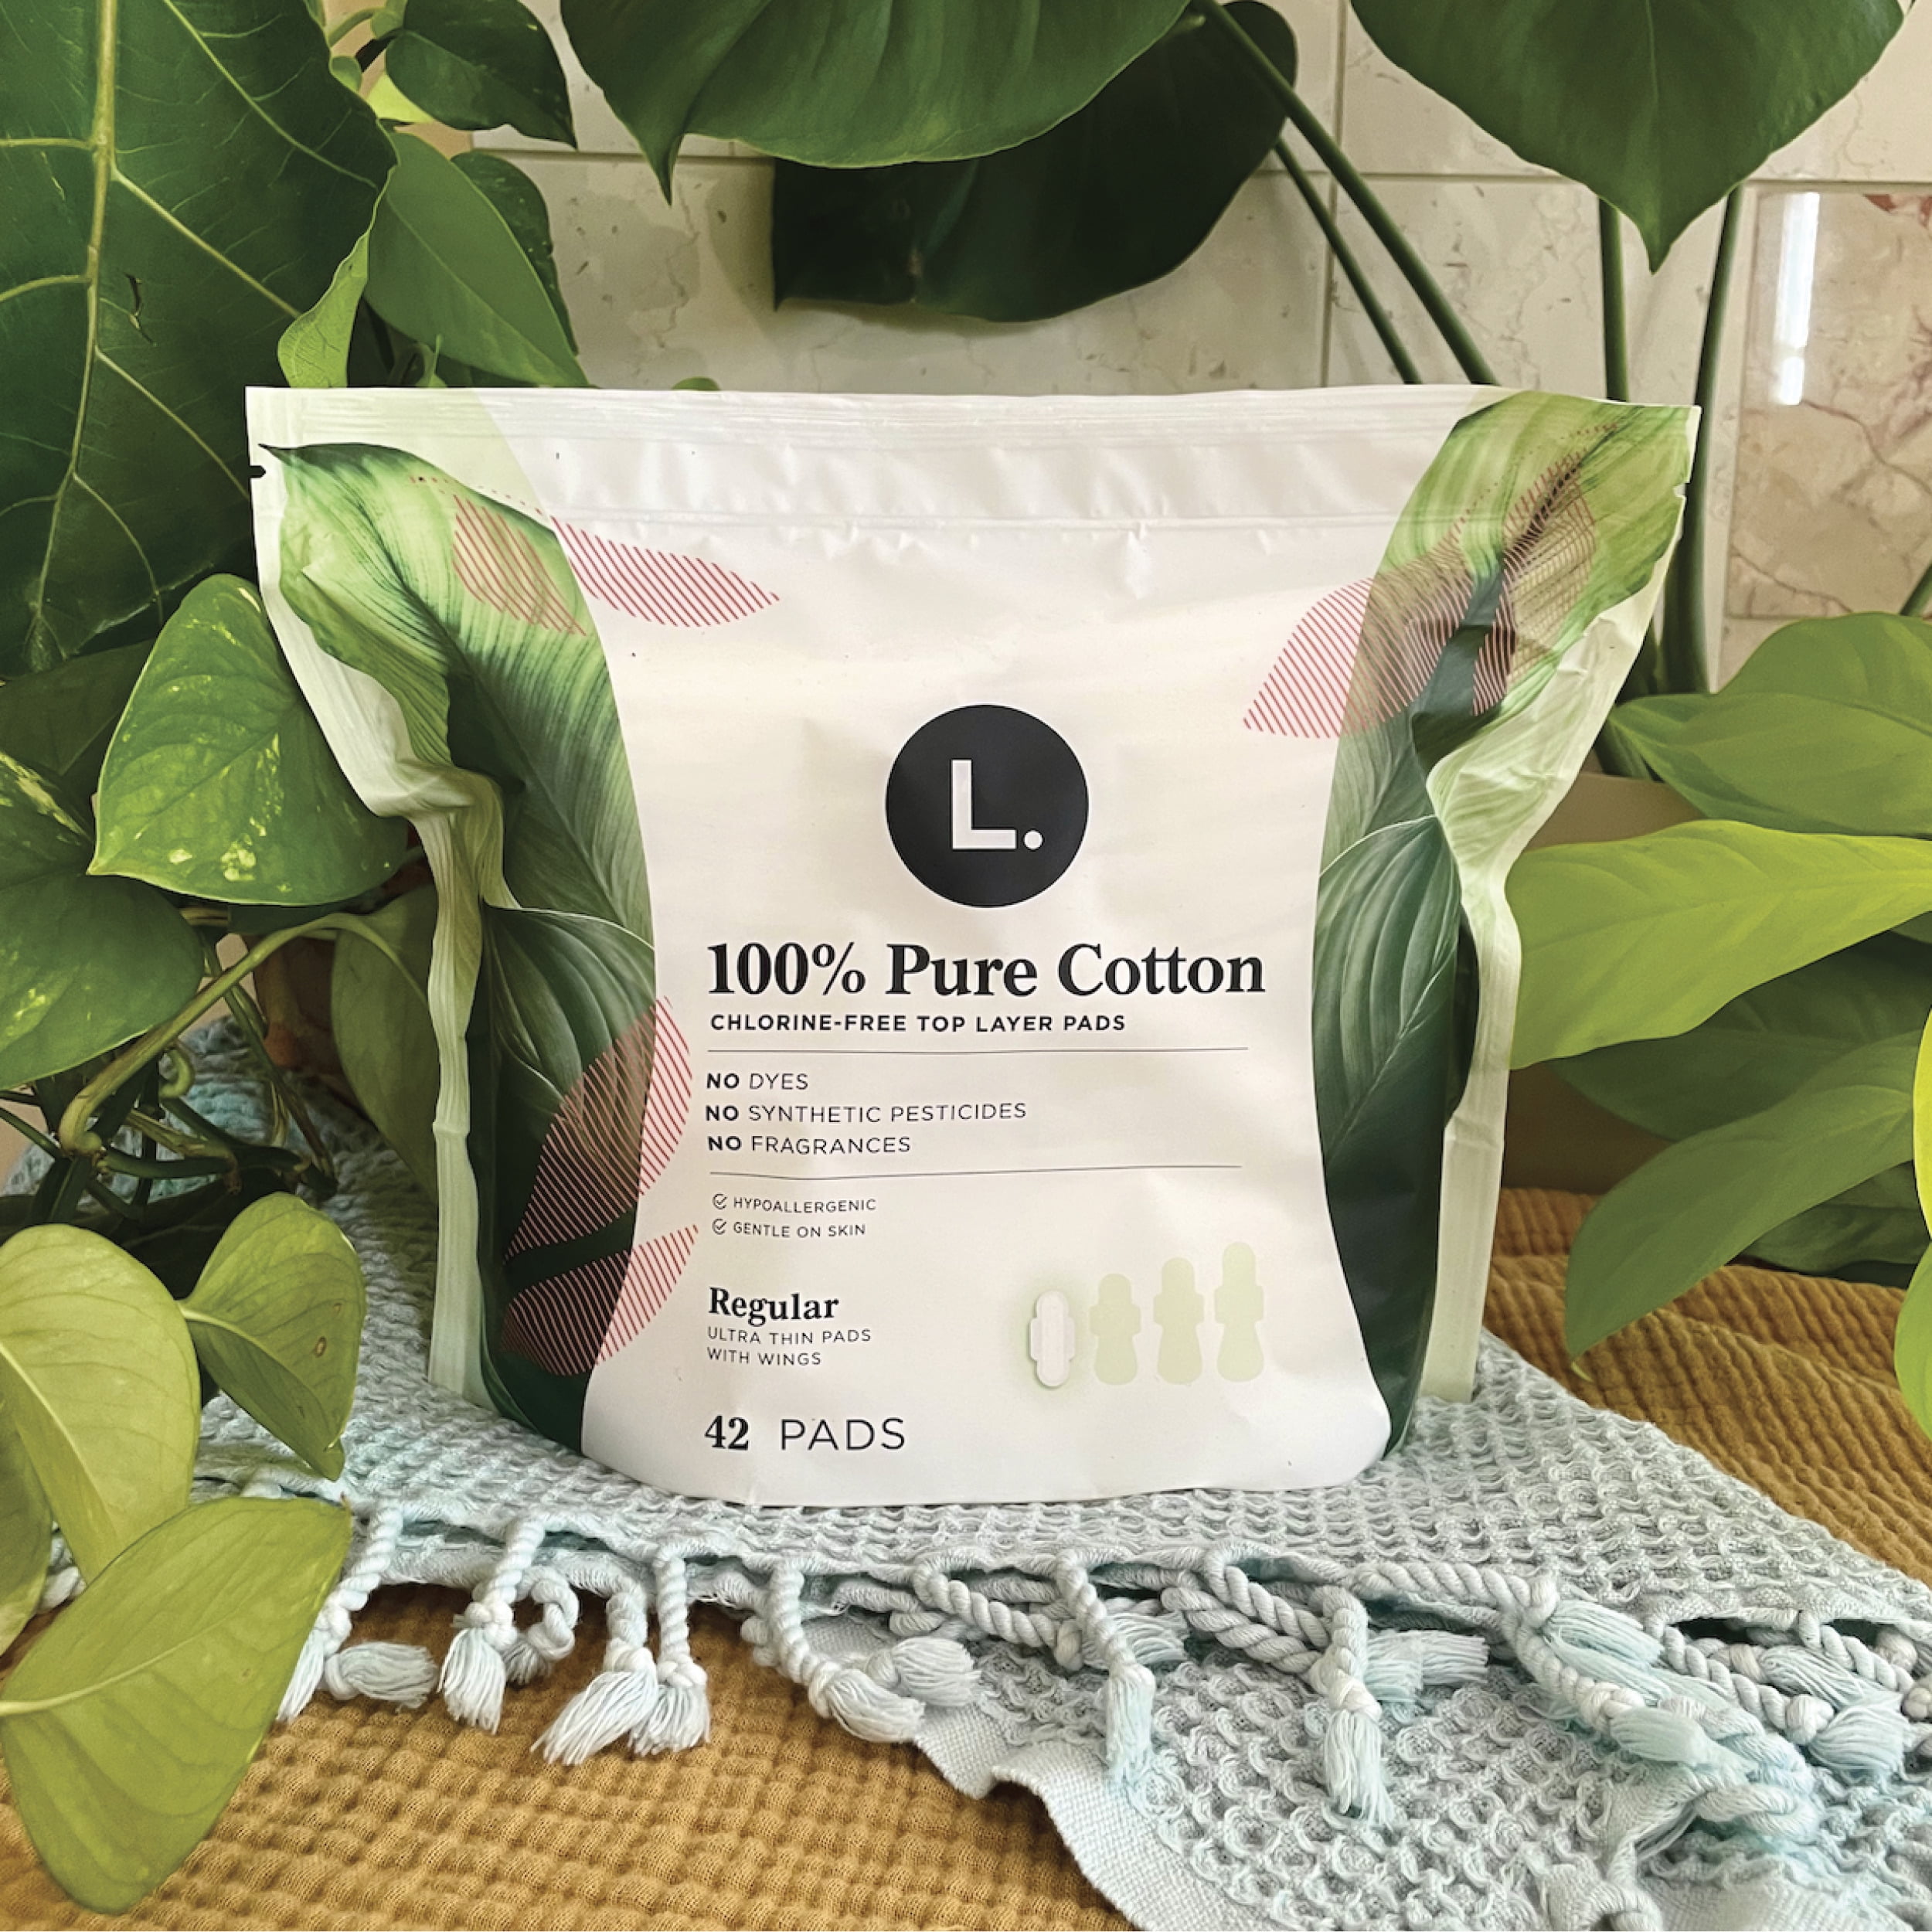 L. Ultra Thin Pads, Super Absorbency, 42 Ct, 100% Pure Cotton Top